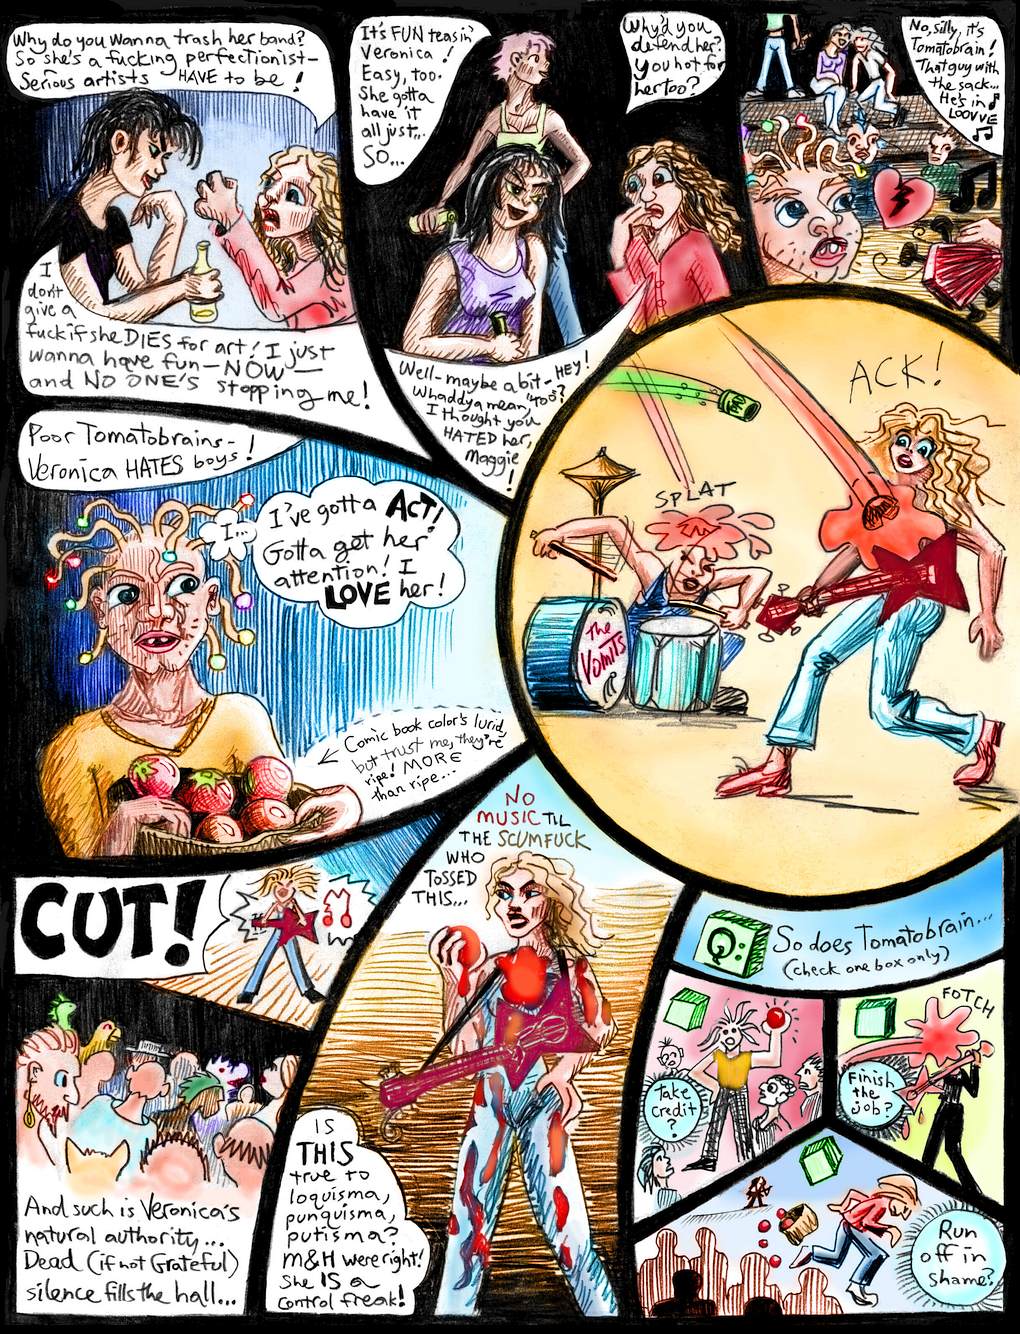 Comic of a dream by Chris Wayan about anorexia. A lovesick fan throws food at Veronica, who stops the show.